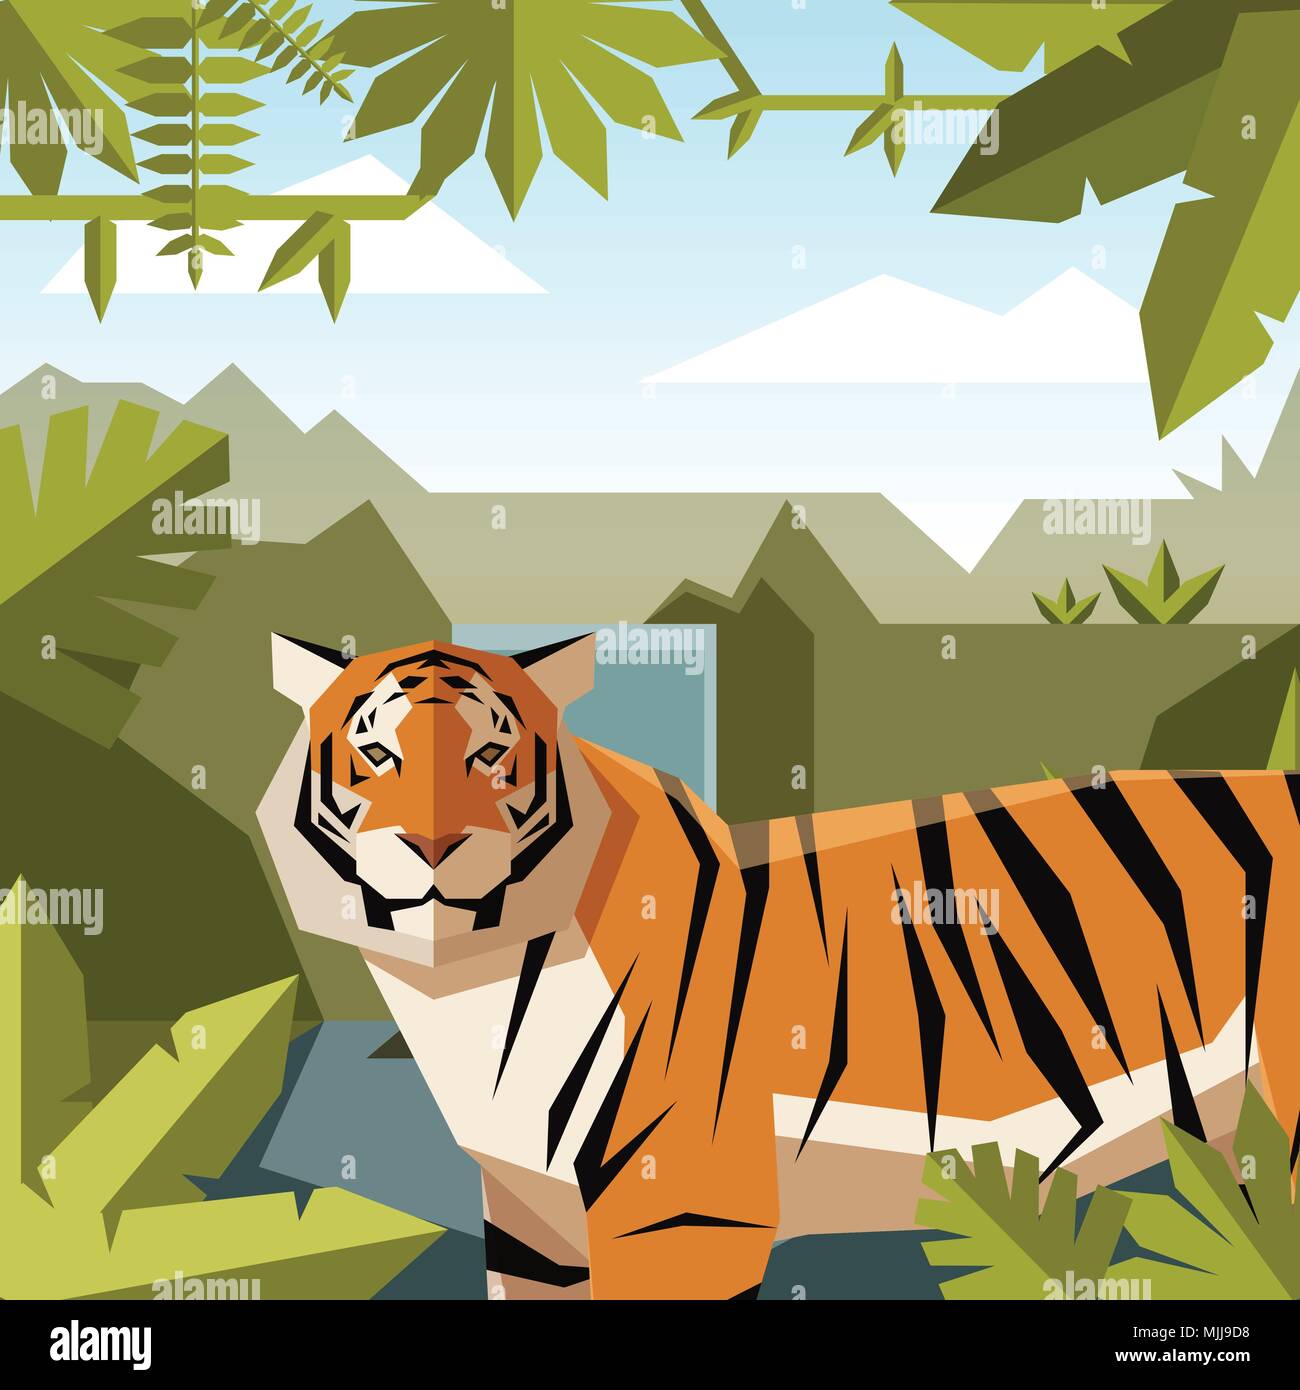 Flat geometric jungle background with Tiger Stock Vector